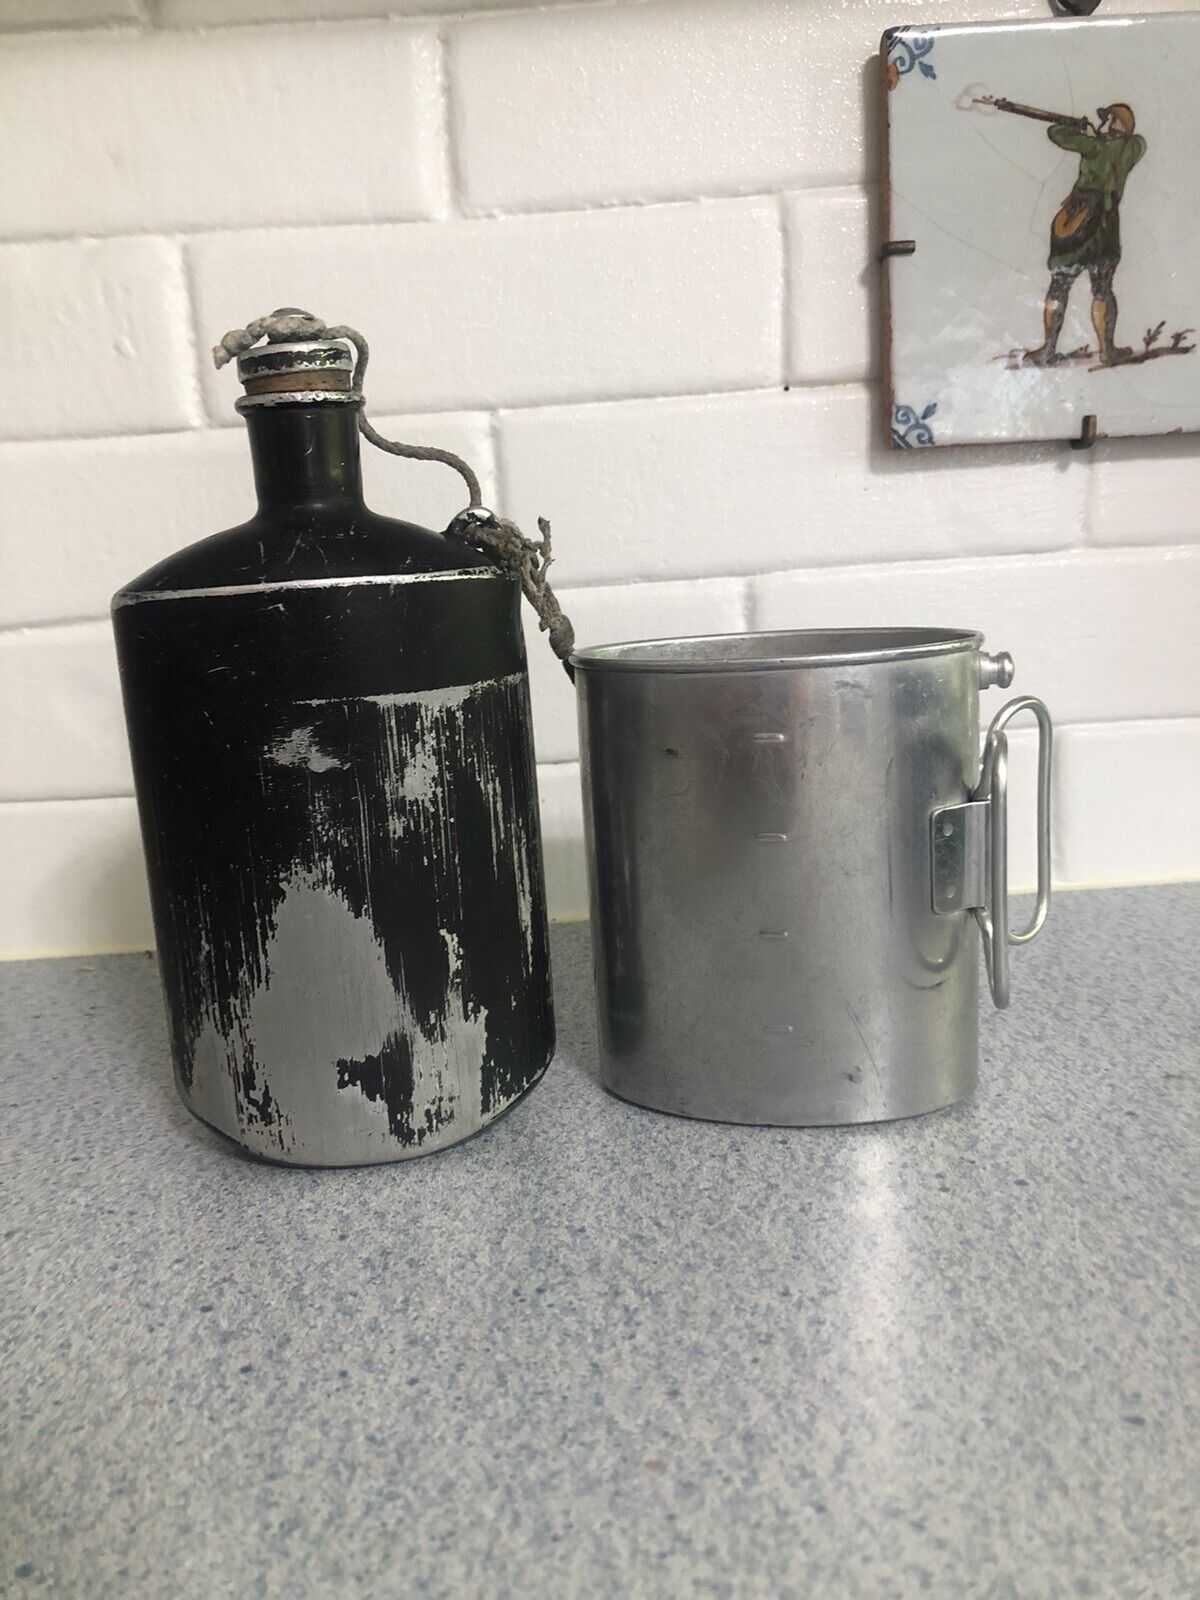 Vintage CANTEEN~~Swiss Military Aluminum Black Canteen/ Cup Marked JE83/SIGG 83